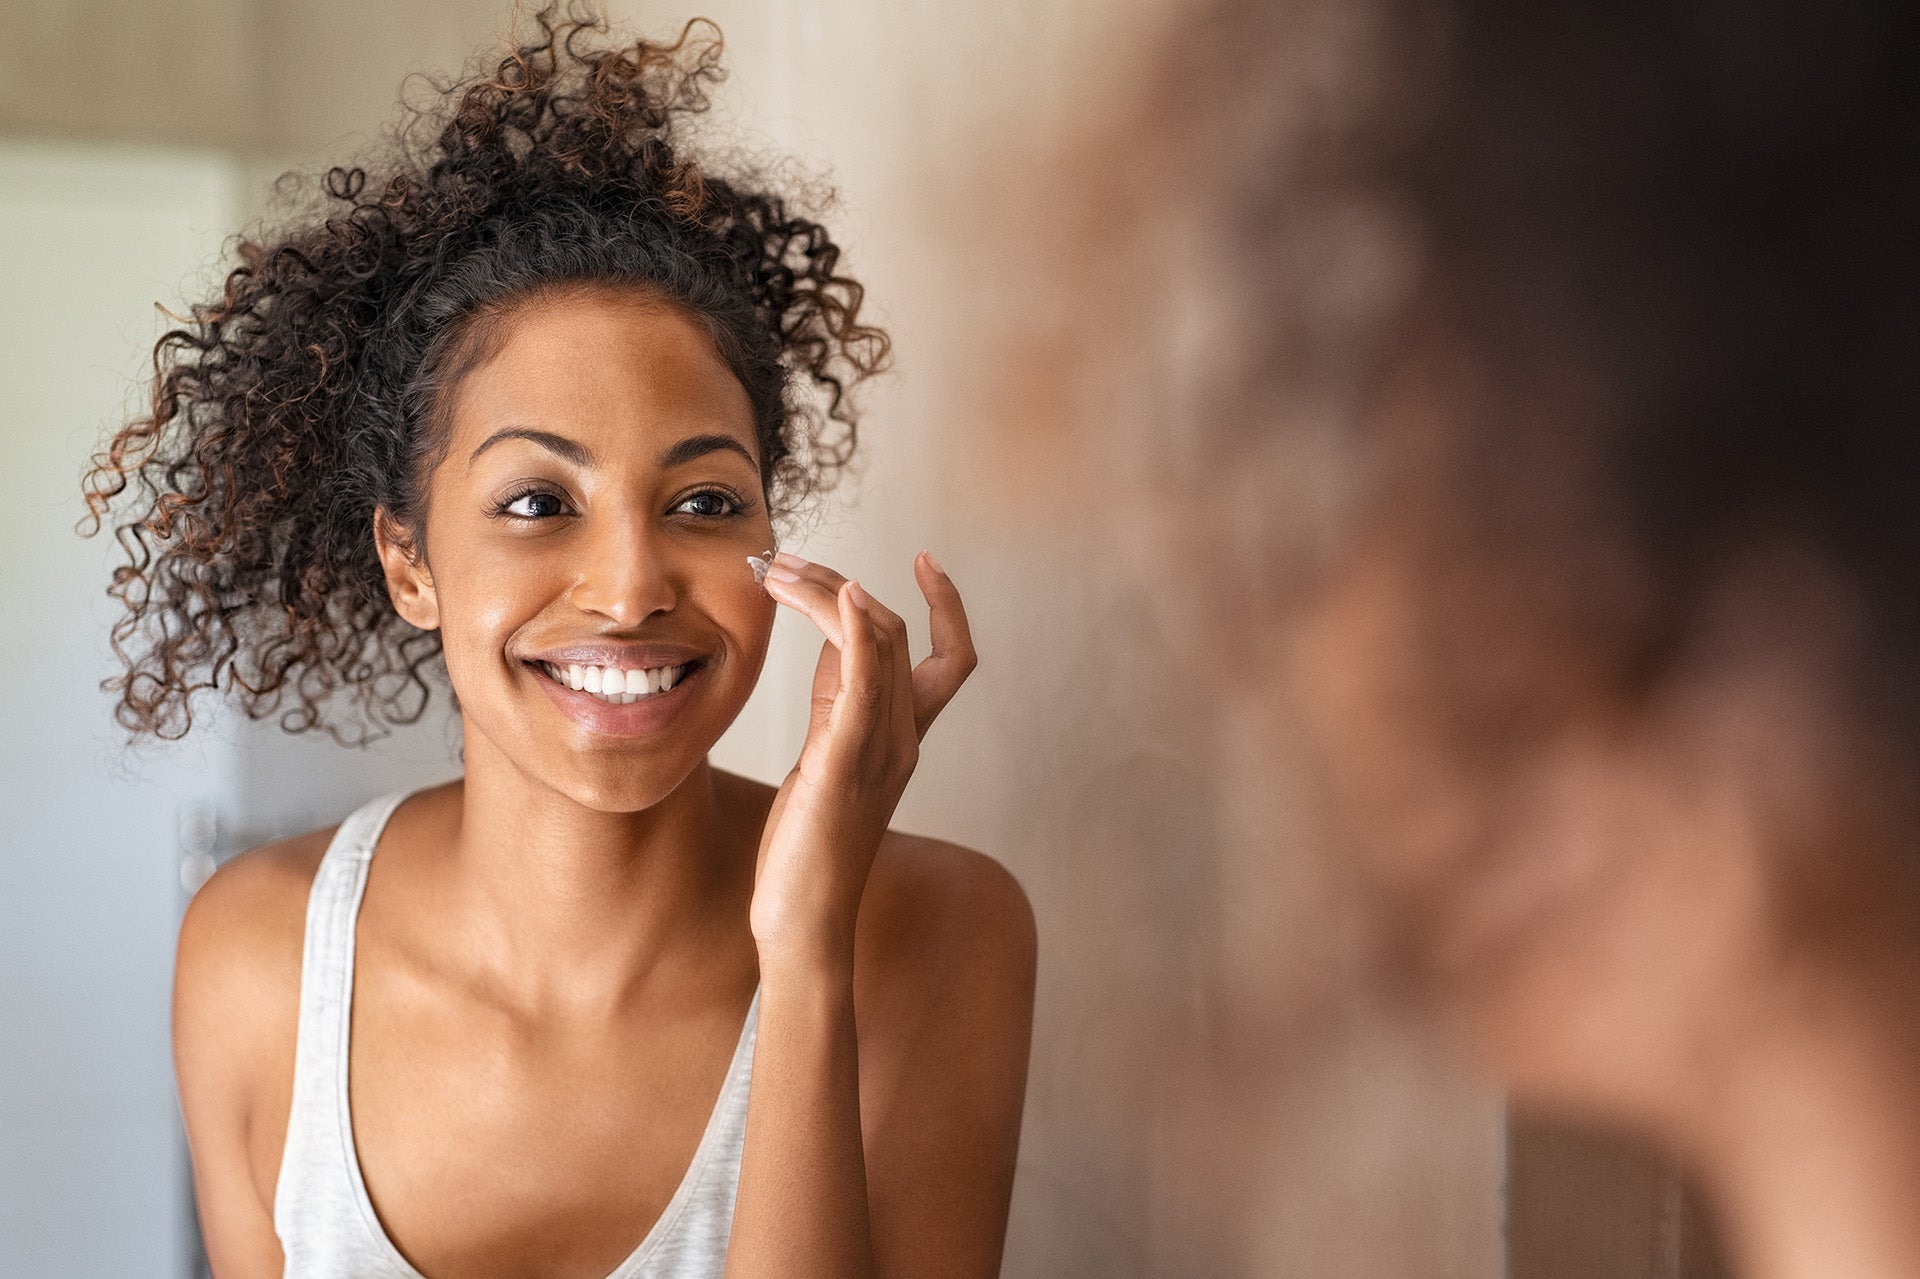 How to repair and maintain a healthy skin barrier